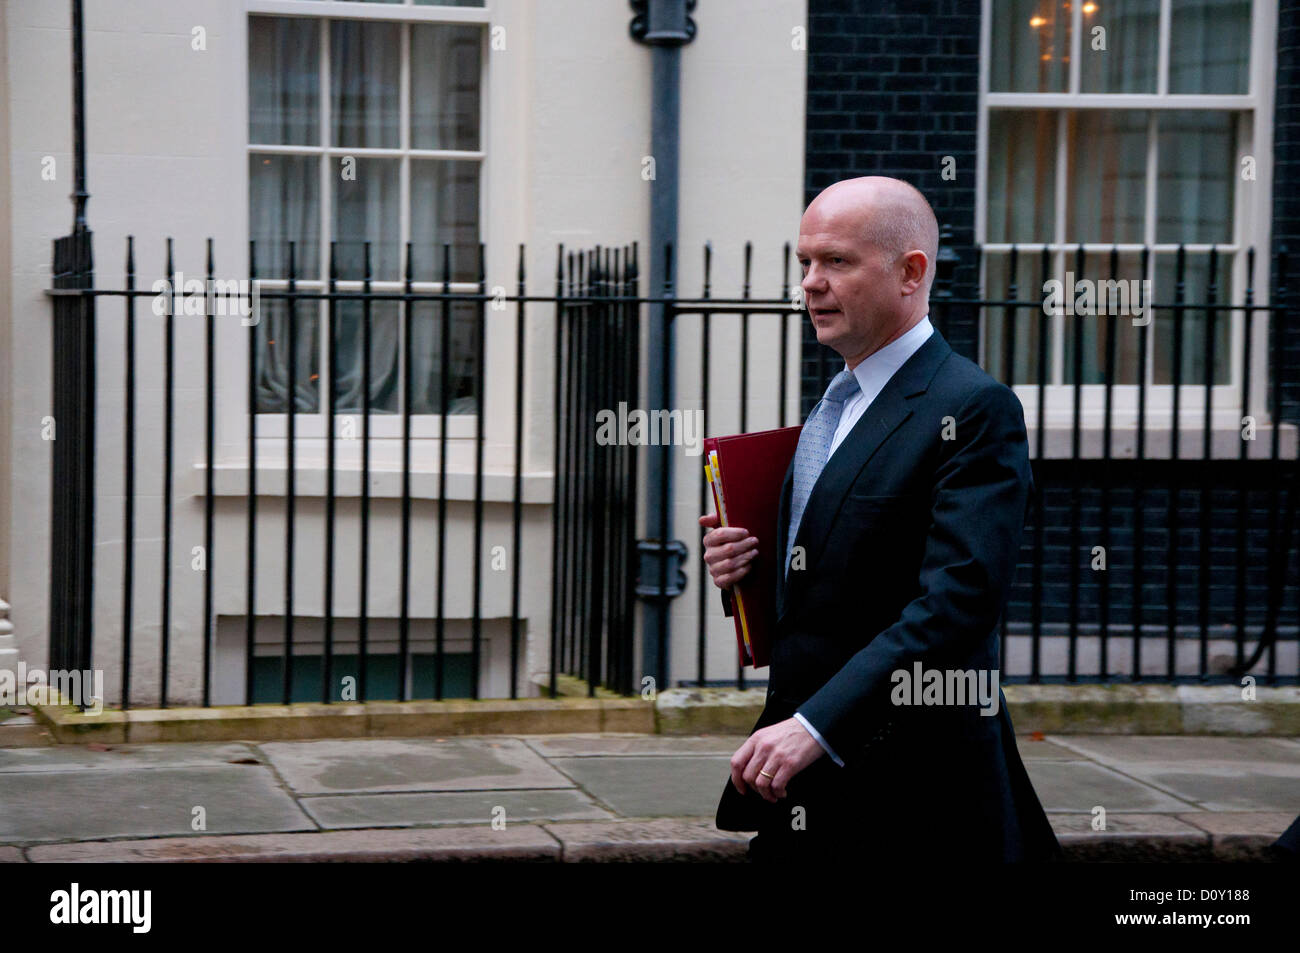 3 December 2012, London; Foreign Secretary, William Hague MP leaves 10 Downing Street following the summons to the Foreign and Commonwealth Office (FCO) of the Israeli Ambassador Daniel Taub. The FCO made it clear to Taub 'the depth of the UK’s concerns' about plans to build 3,000 settler homes in the occupied territories. Credit:  Andy Thornley / Alamy Live News Stock Photo